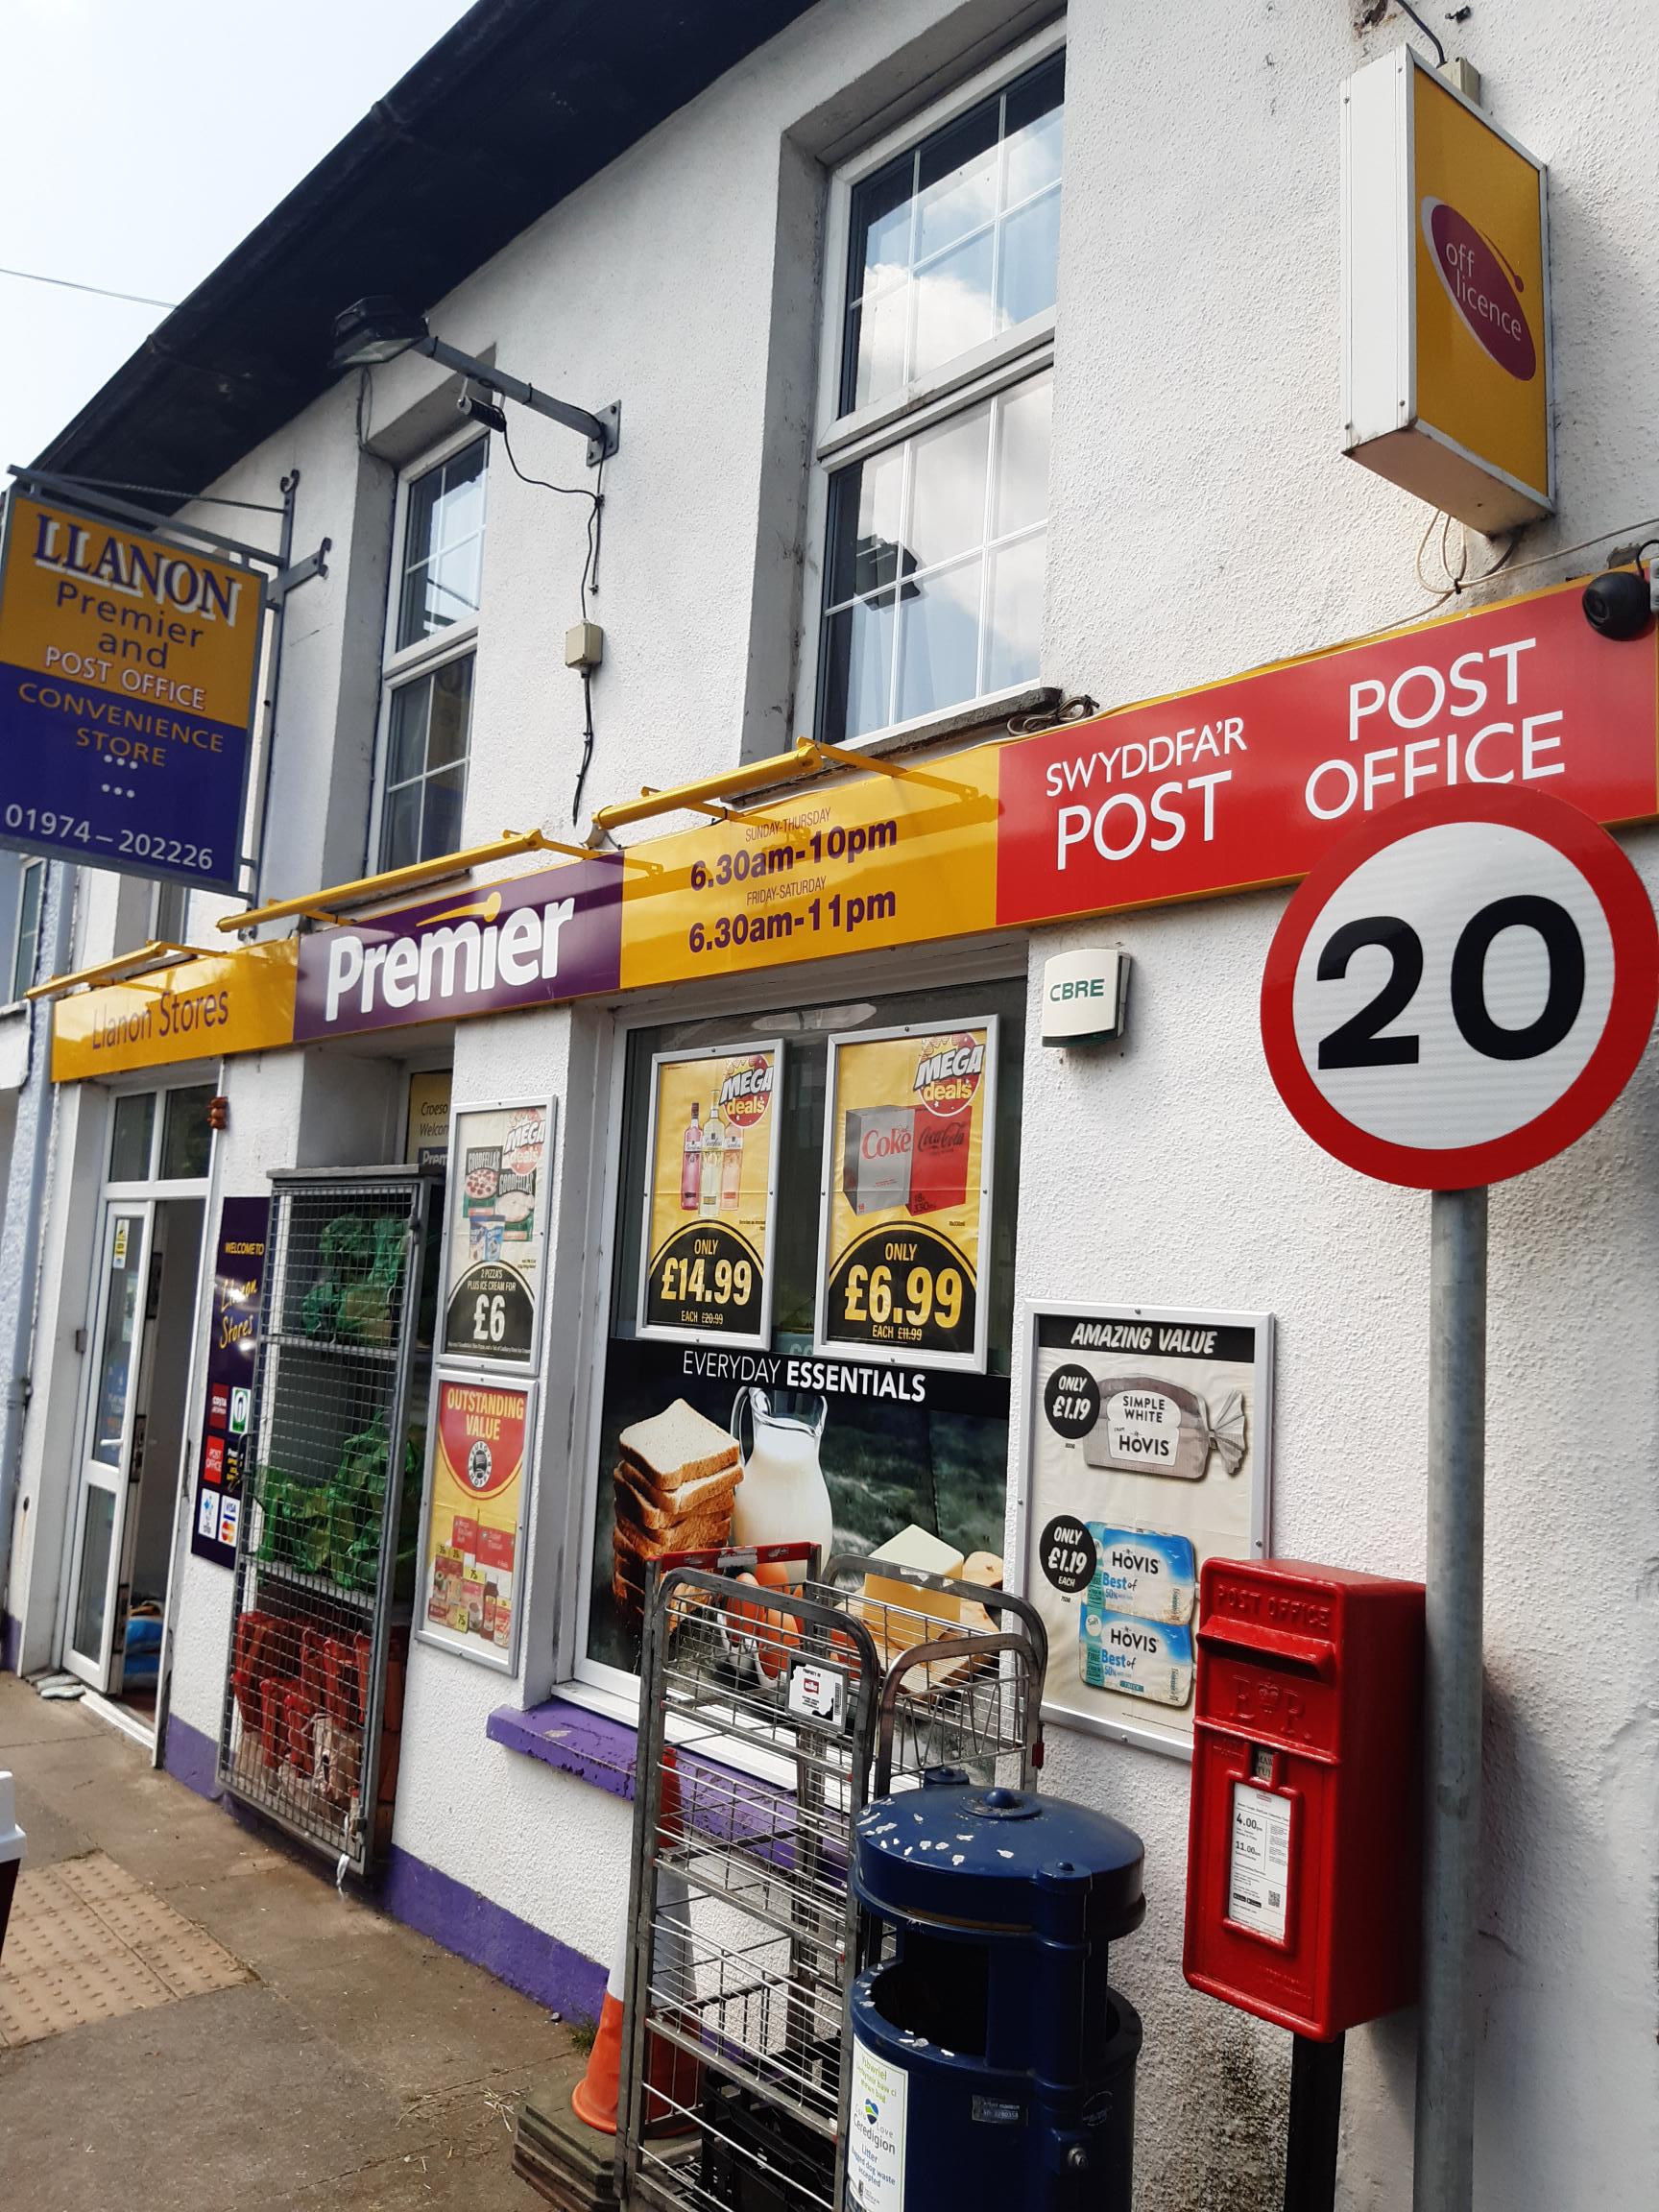 Images Llanon Post Office